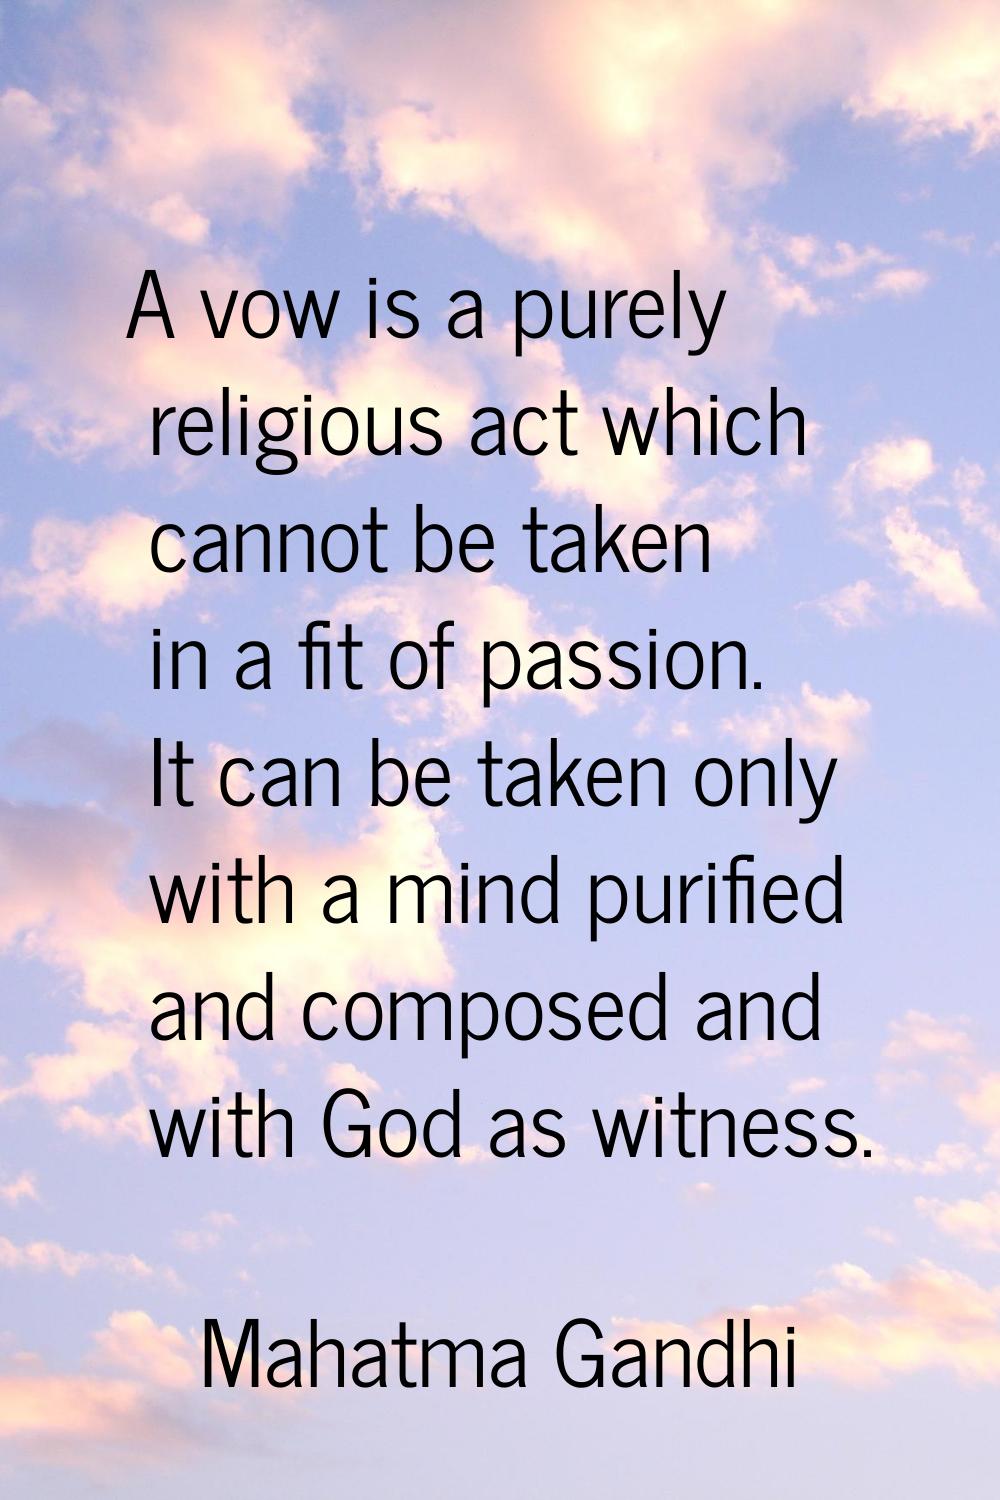 A vow is a purely religious act which cannot be taken in a fit of passion. It can be taken only wit